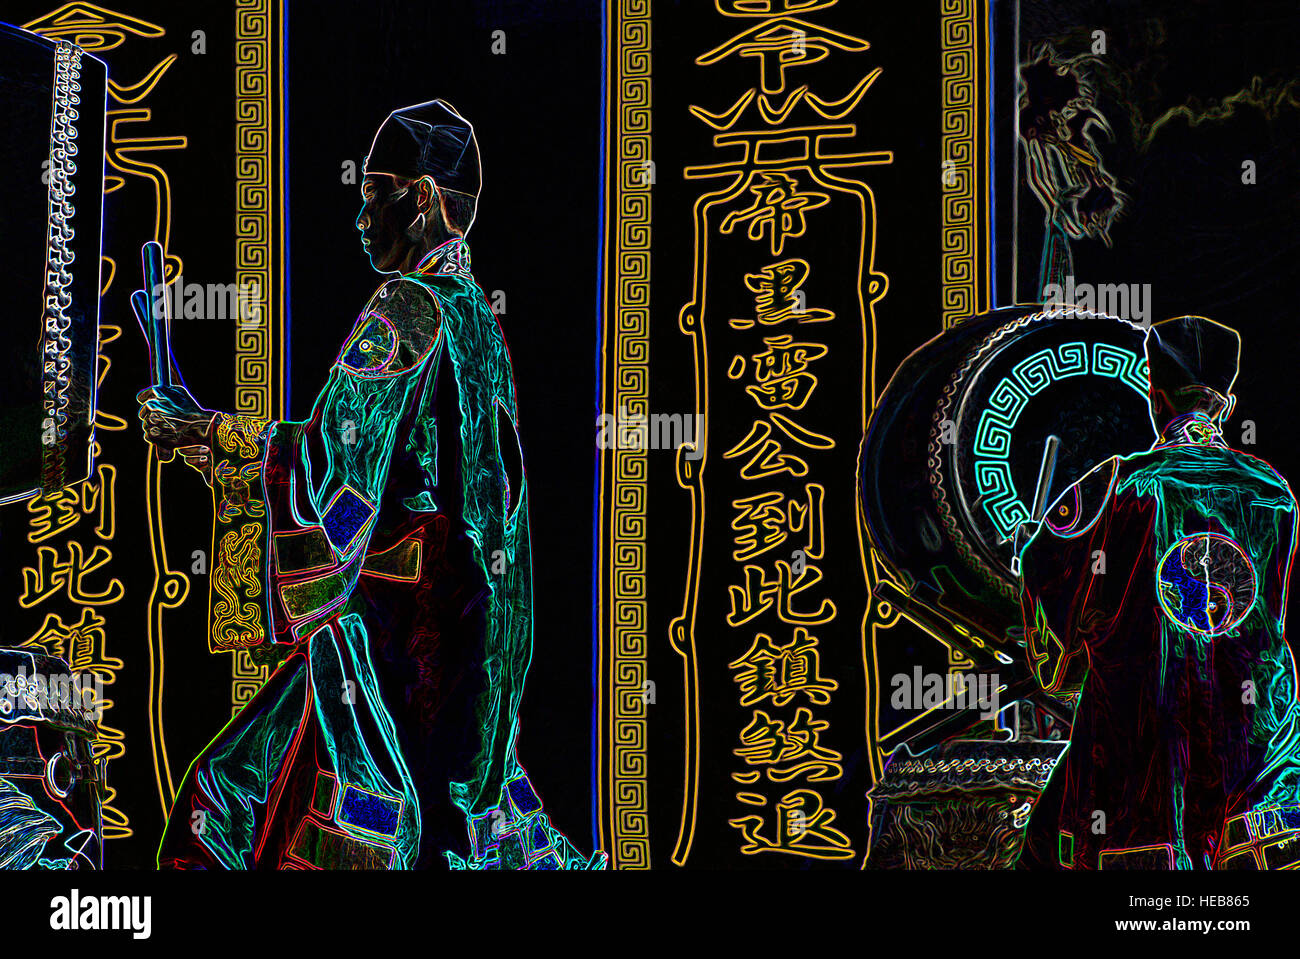 Taiwanese Drummers drumming on Taiko Drums - Digitally Manipulated Image with Glowing Edges, Abstract Musicians and Performance Stock Photo